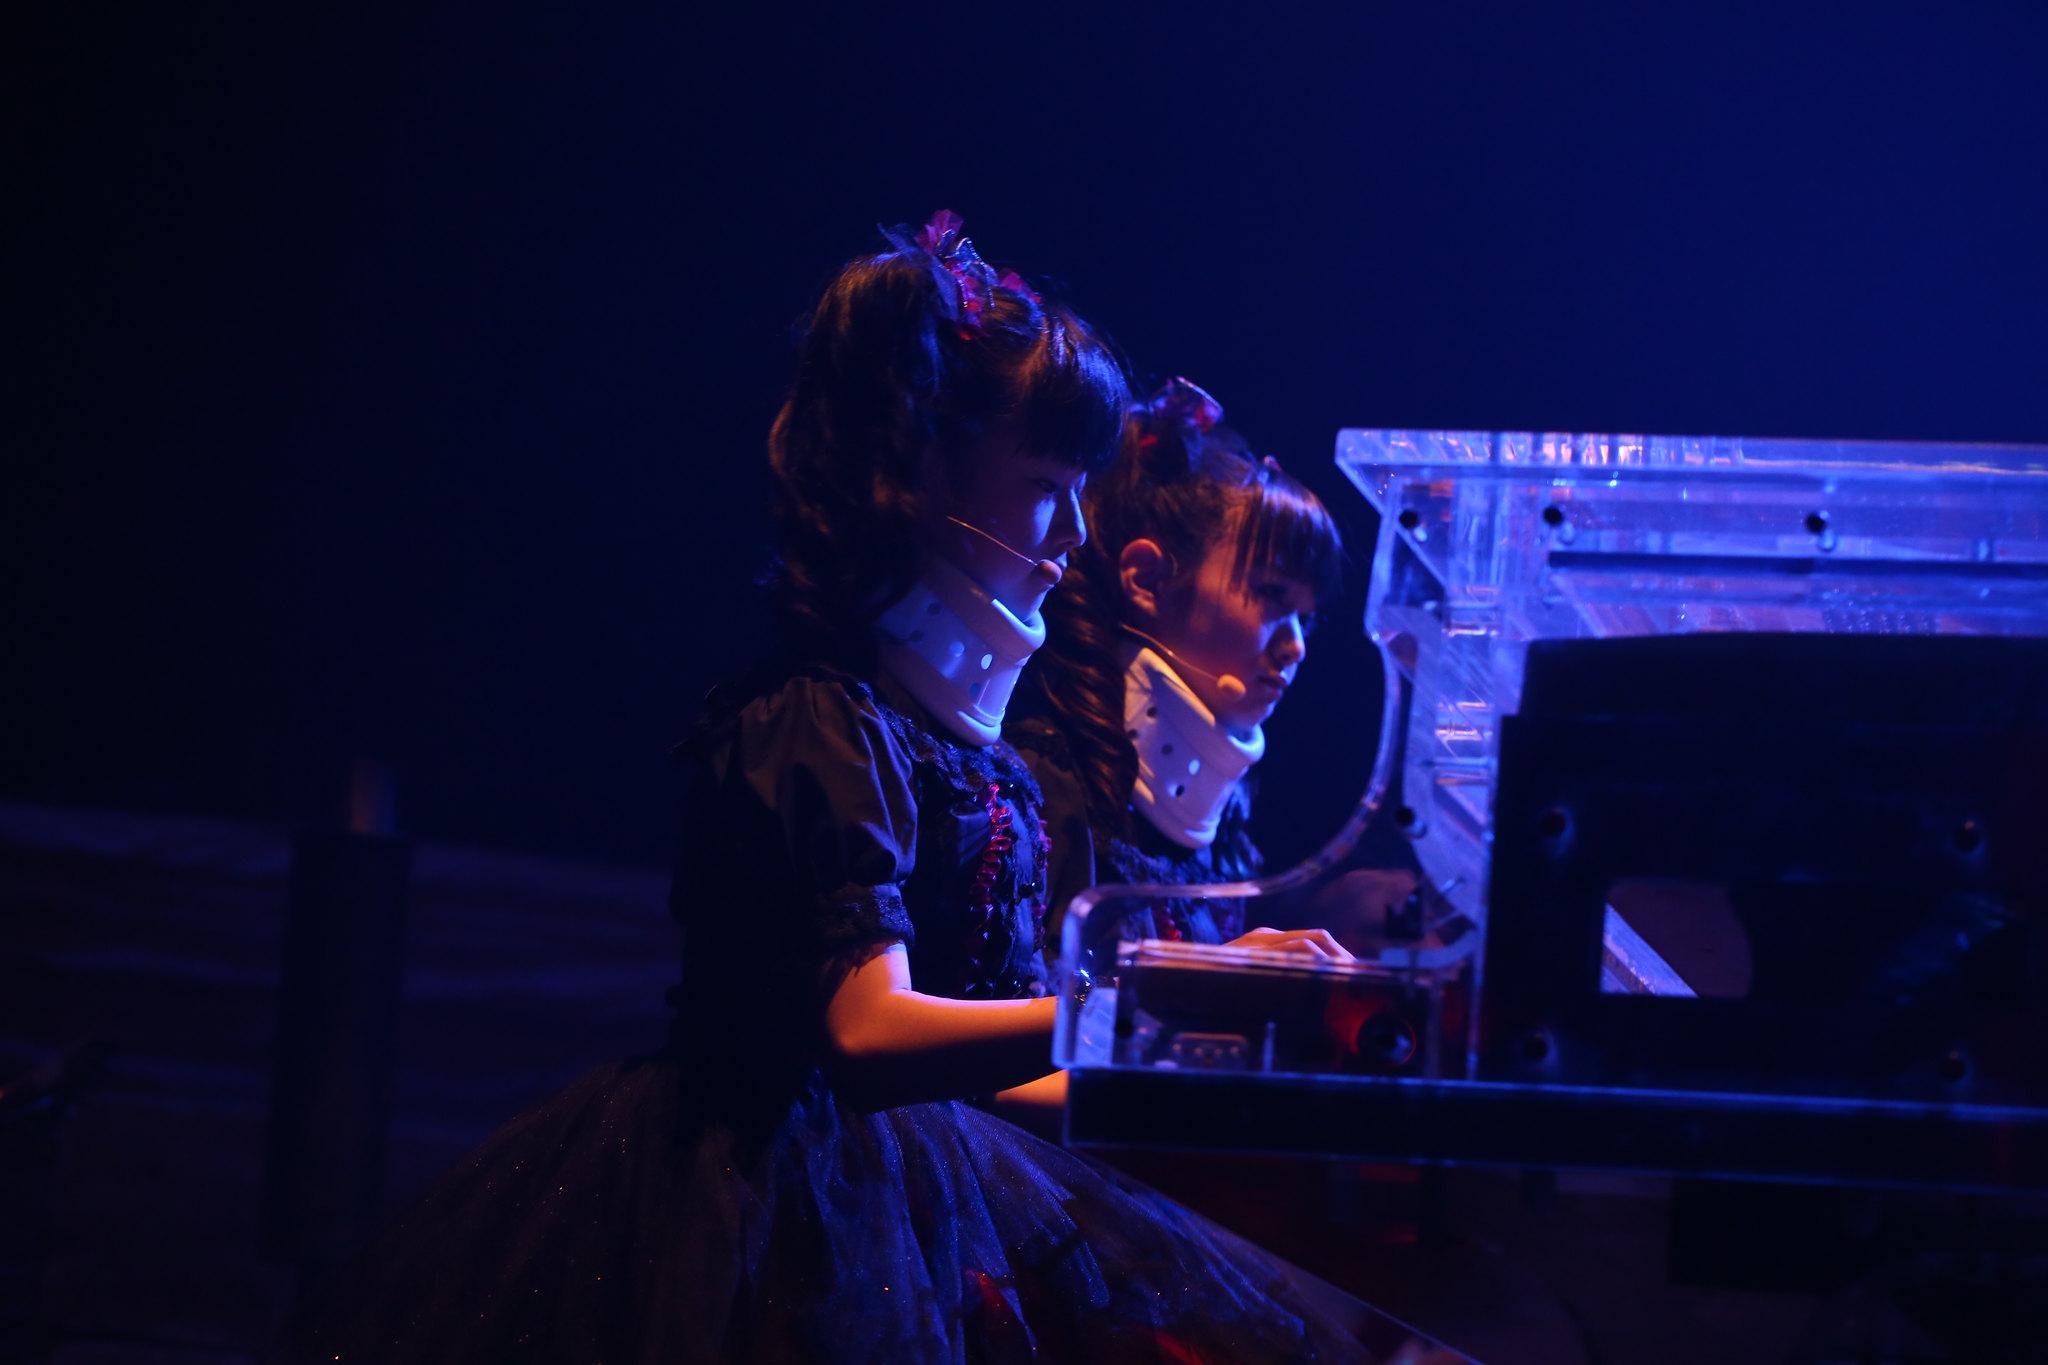 YUIMETAL and MOAMETAL playing a crystal piano in homage to Yoshiki